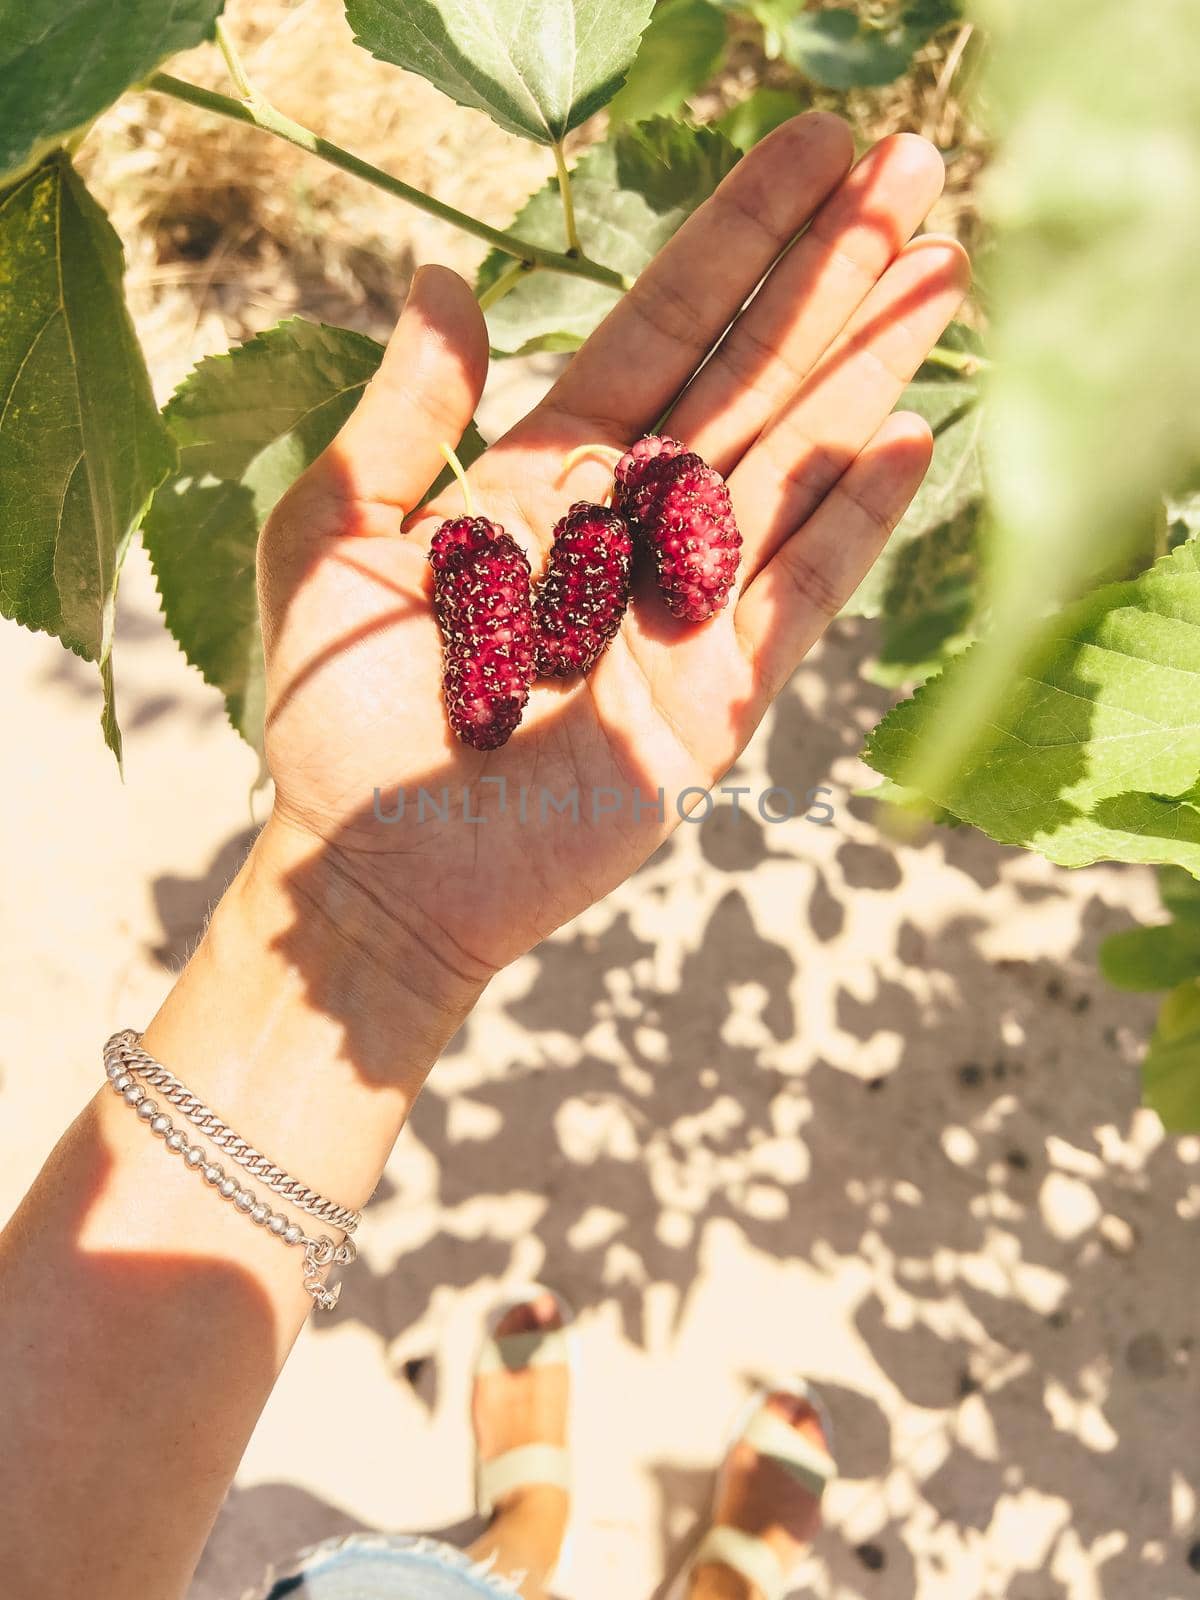 The close up picture of a young woman's hand holding mulberry berries on her palm with green leaves on the background. A fresh crop of mulberries from the tree.